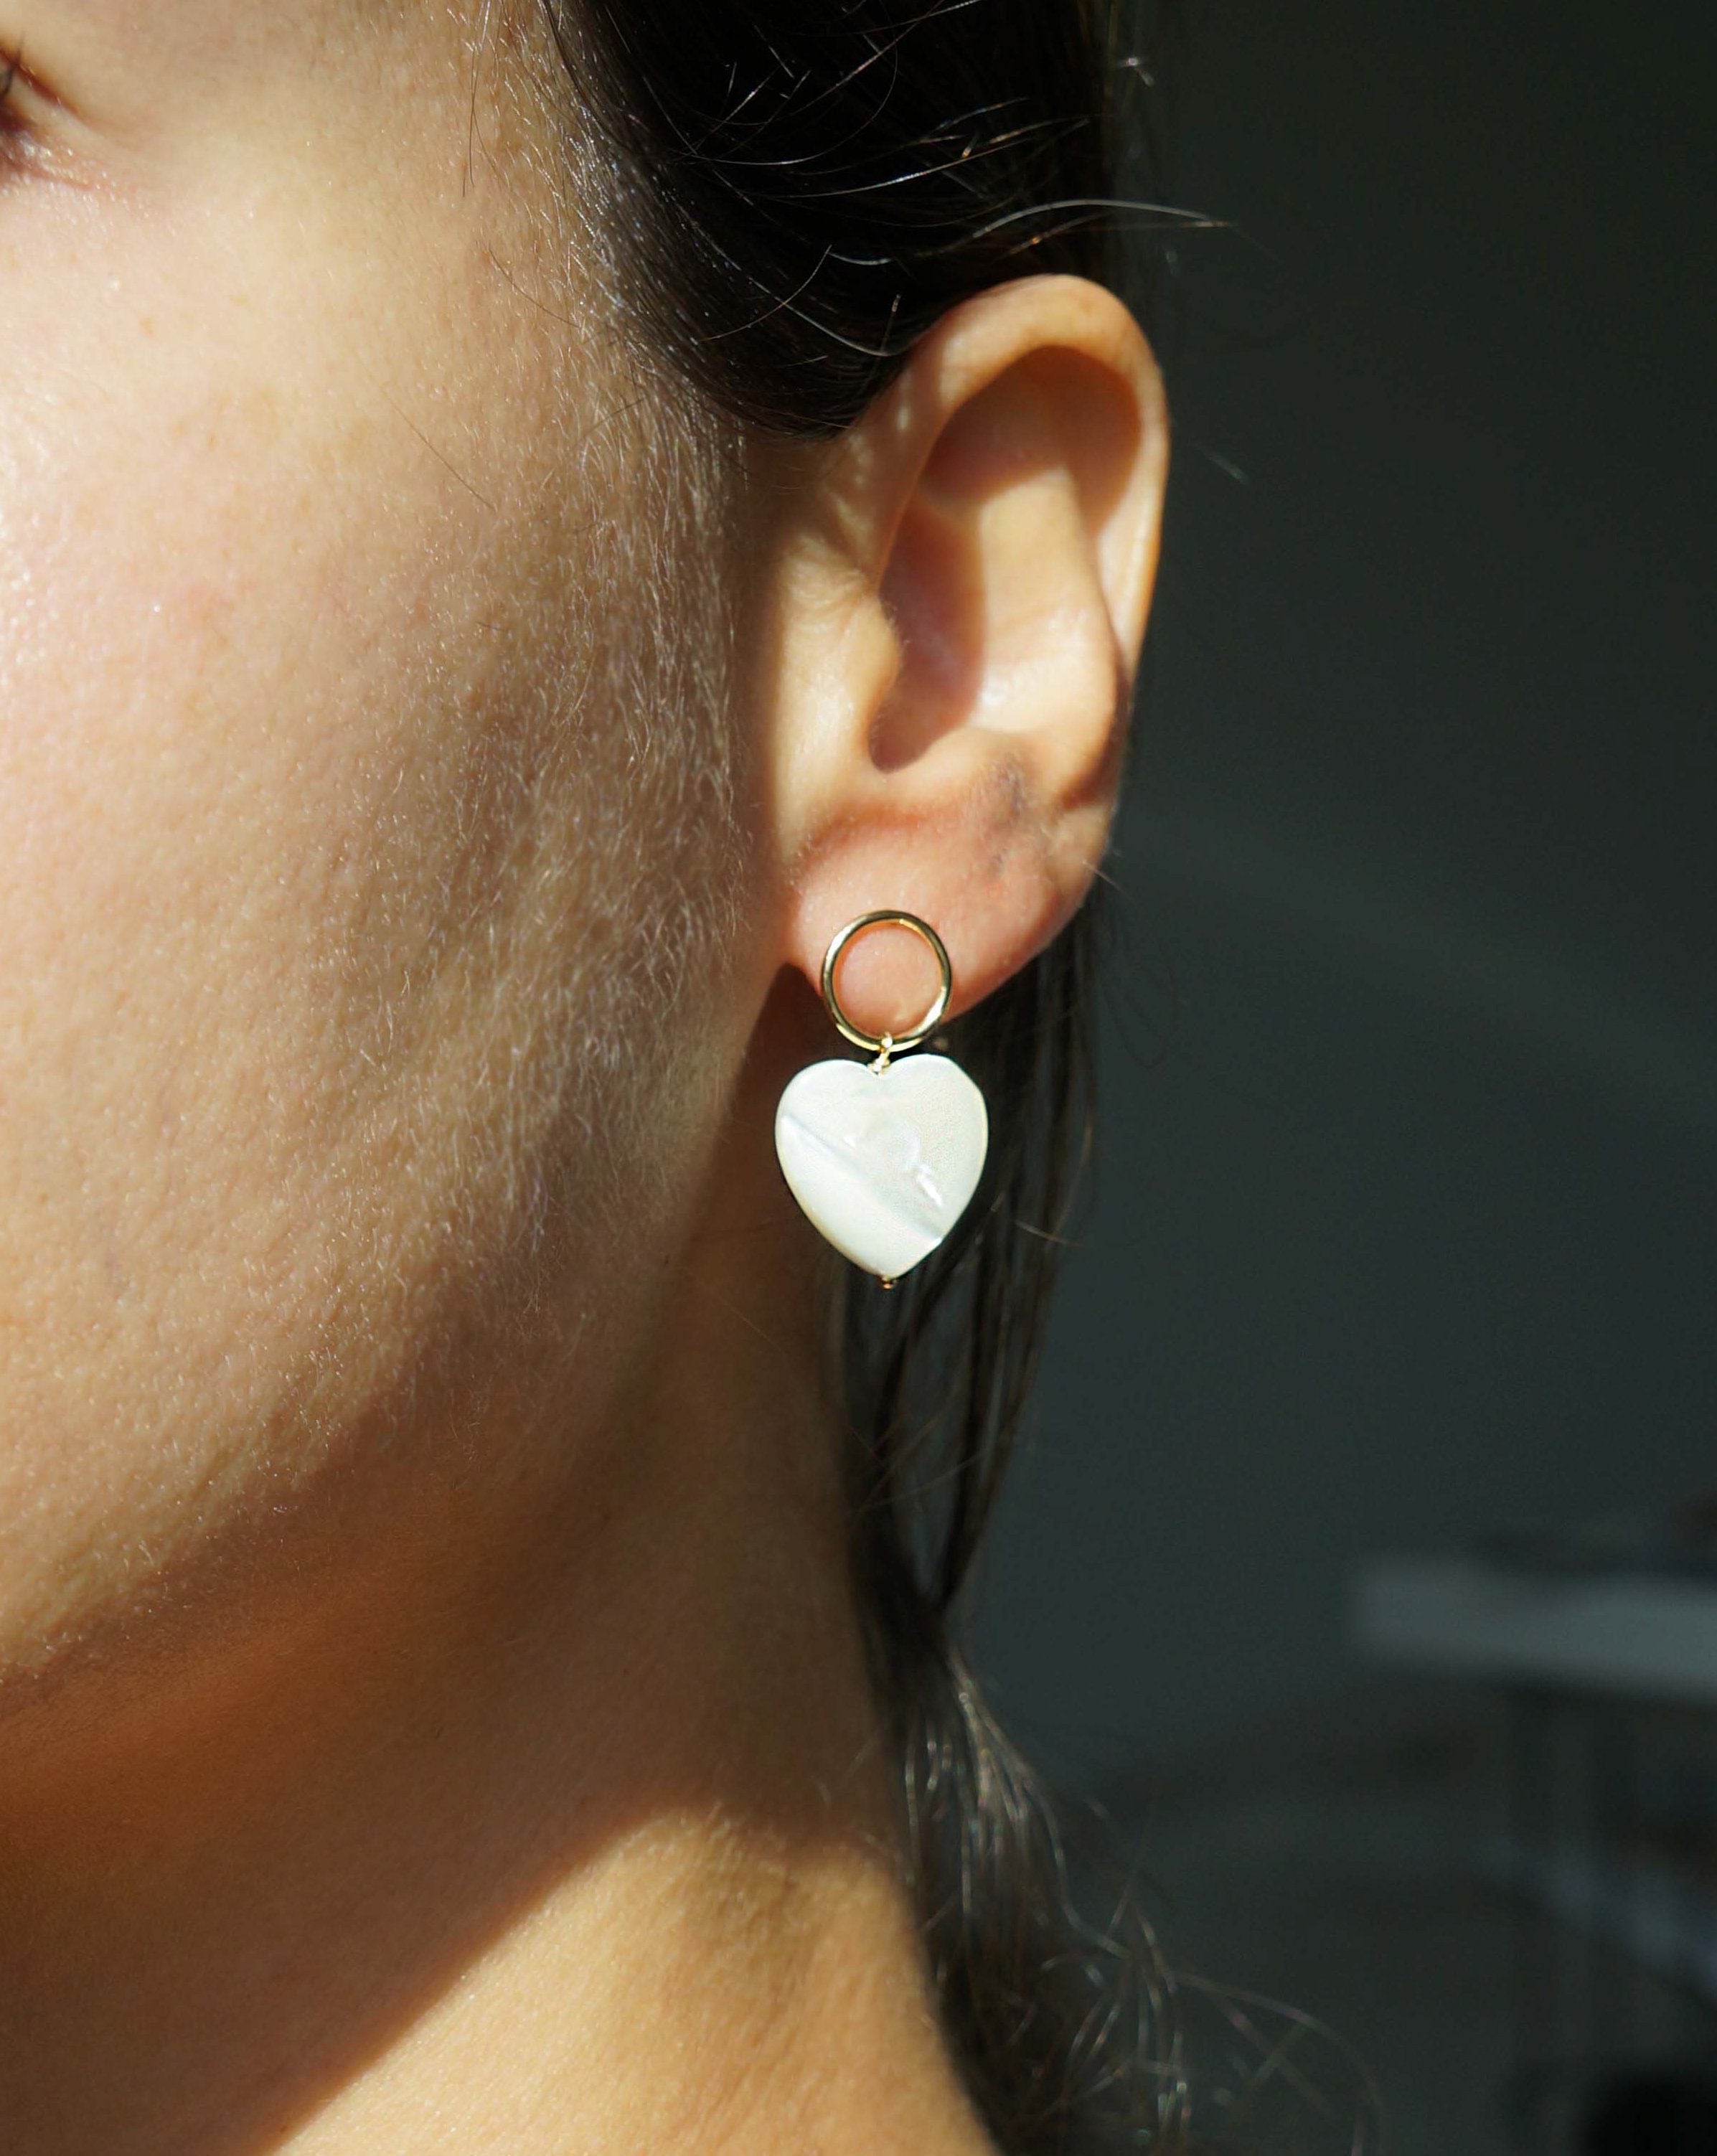 Heart Earrings by KOZAKH. Stud earrings, crafted in 14K Gold Filled, with hoop and hand carved faceted Mother of Pearl heart charm.